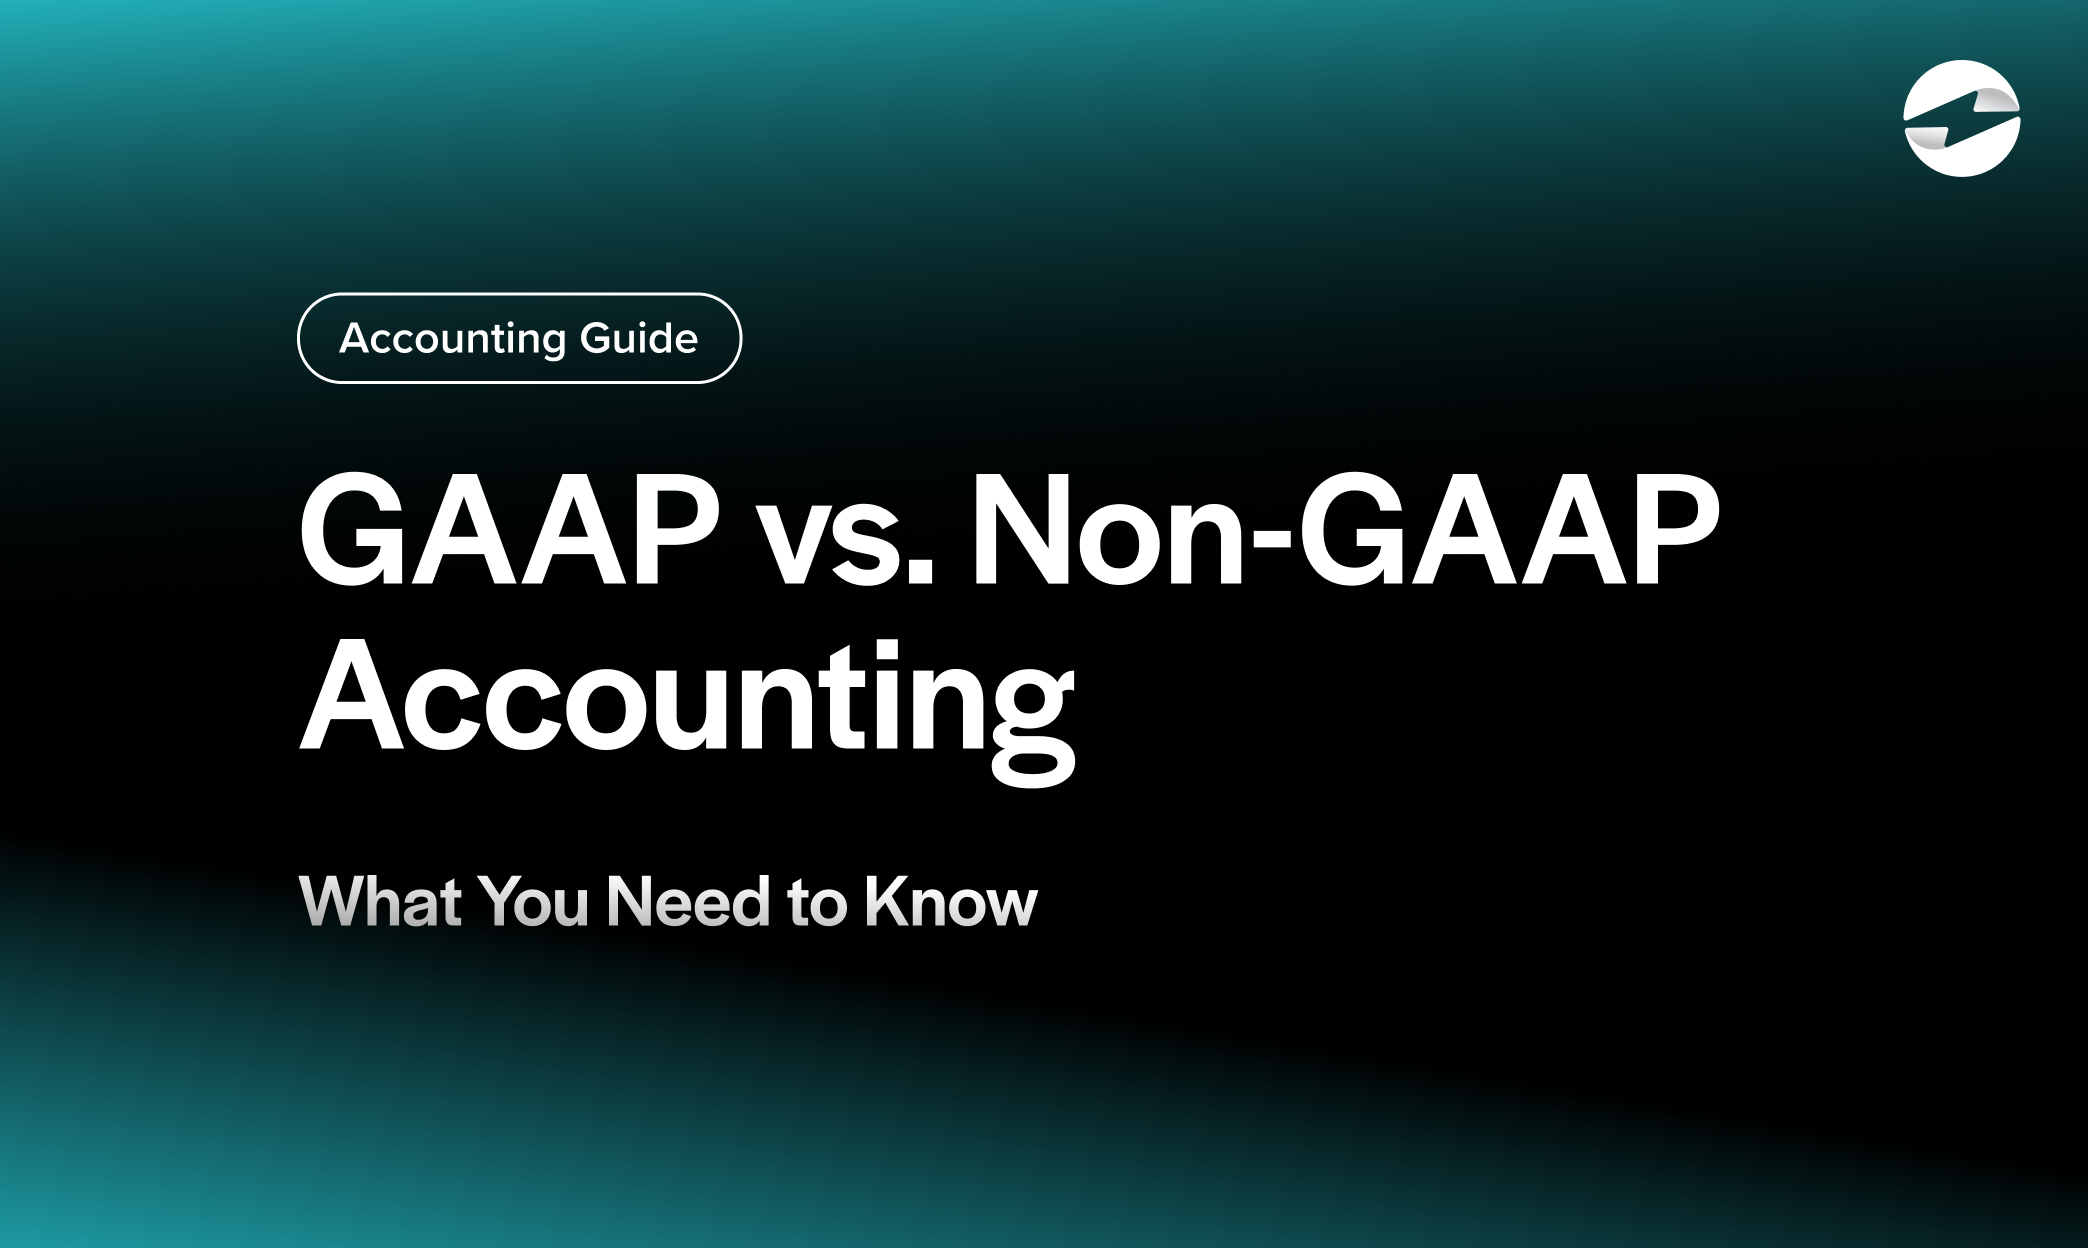 GAAP vs. Non-GAAP Accounting: What You Need to Know